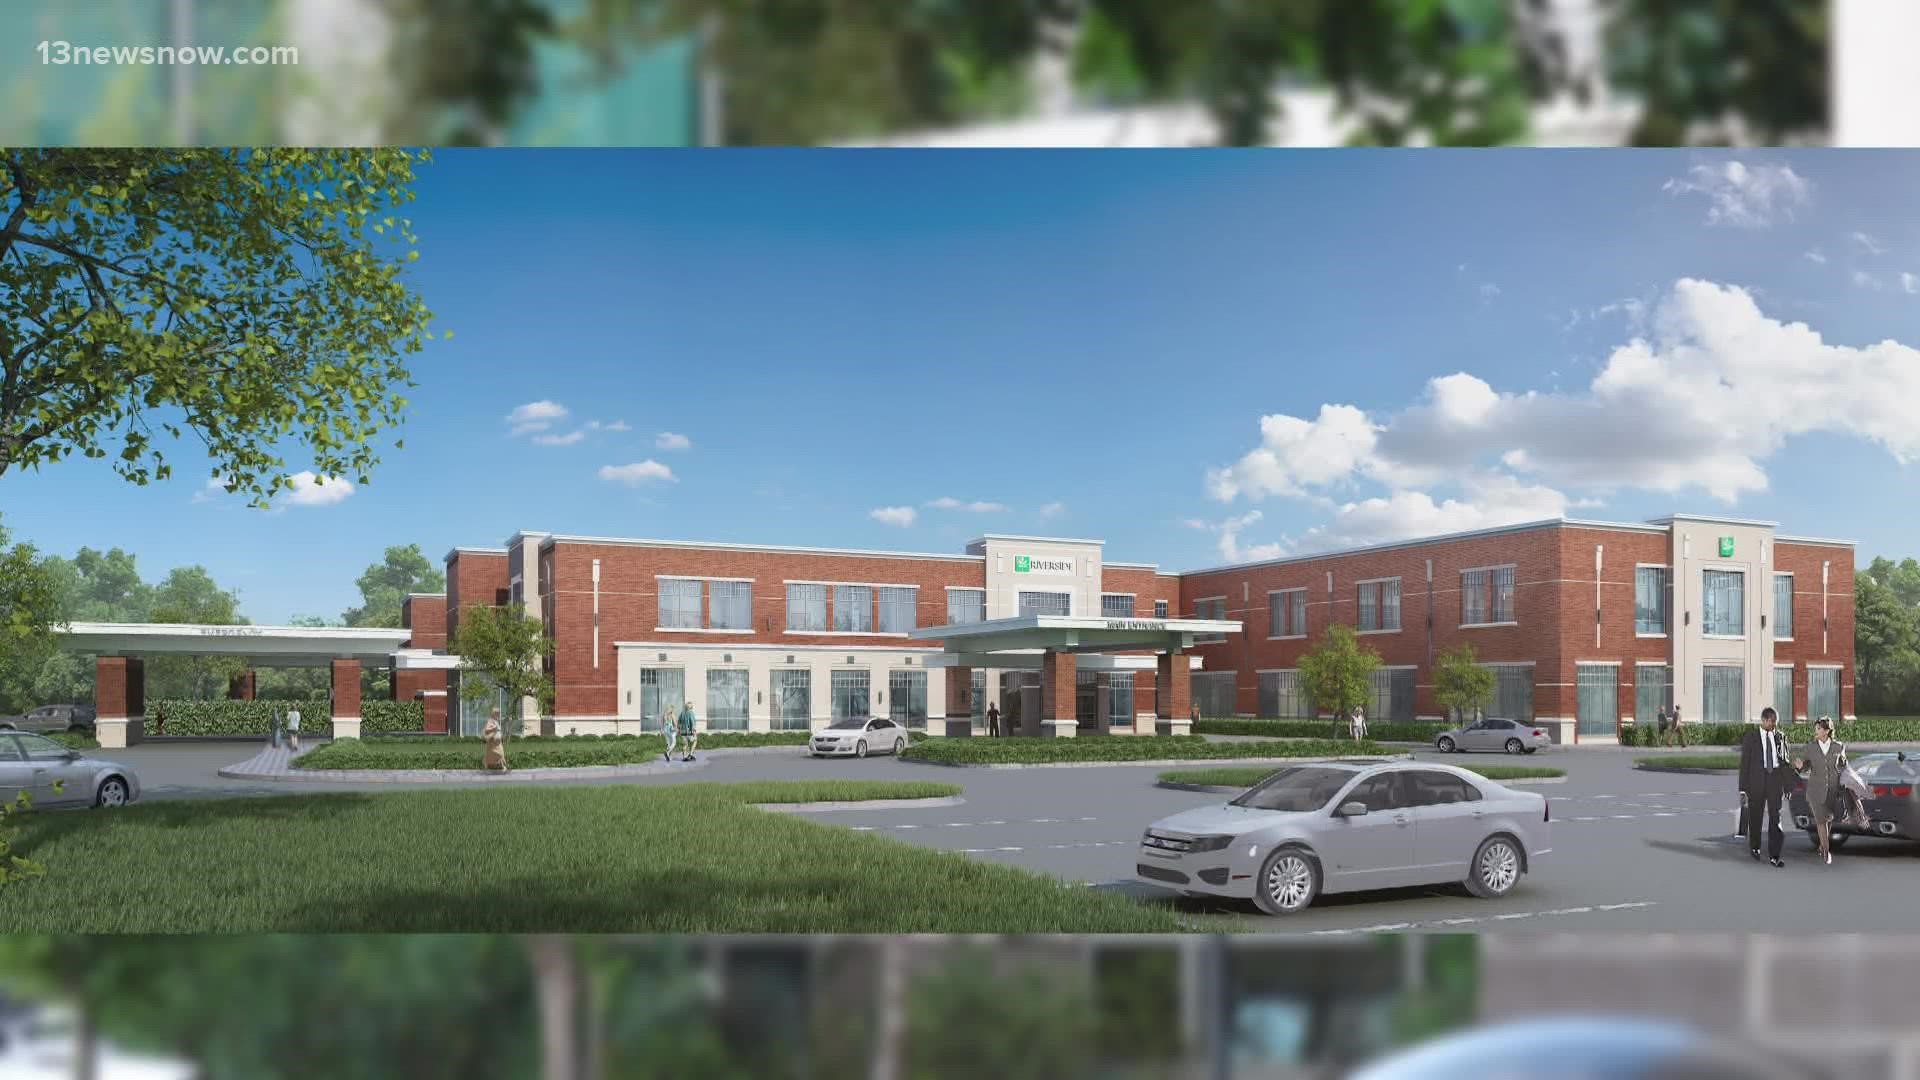 Riverside Health System is working to build a hospital in Isle of Wight County. Its closest medical facility is in Newport News.